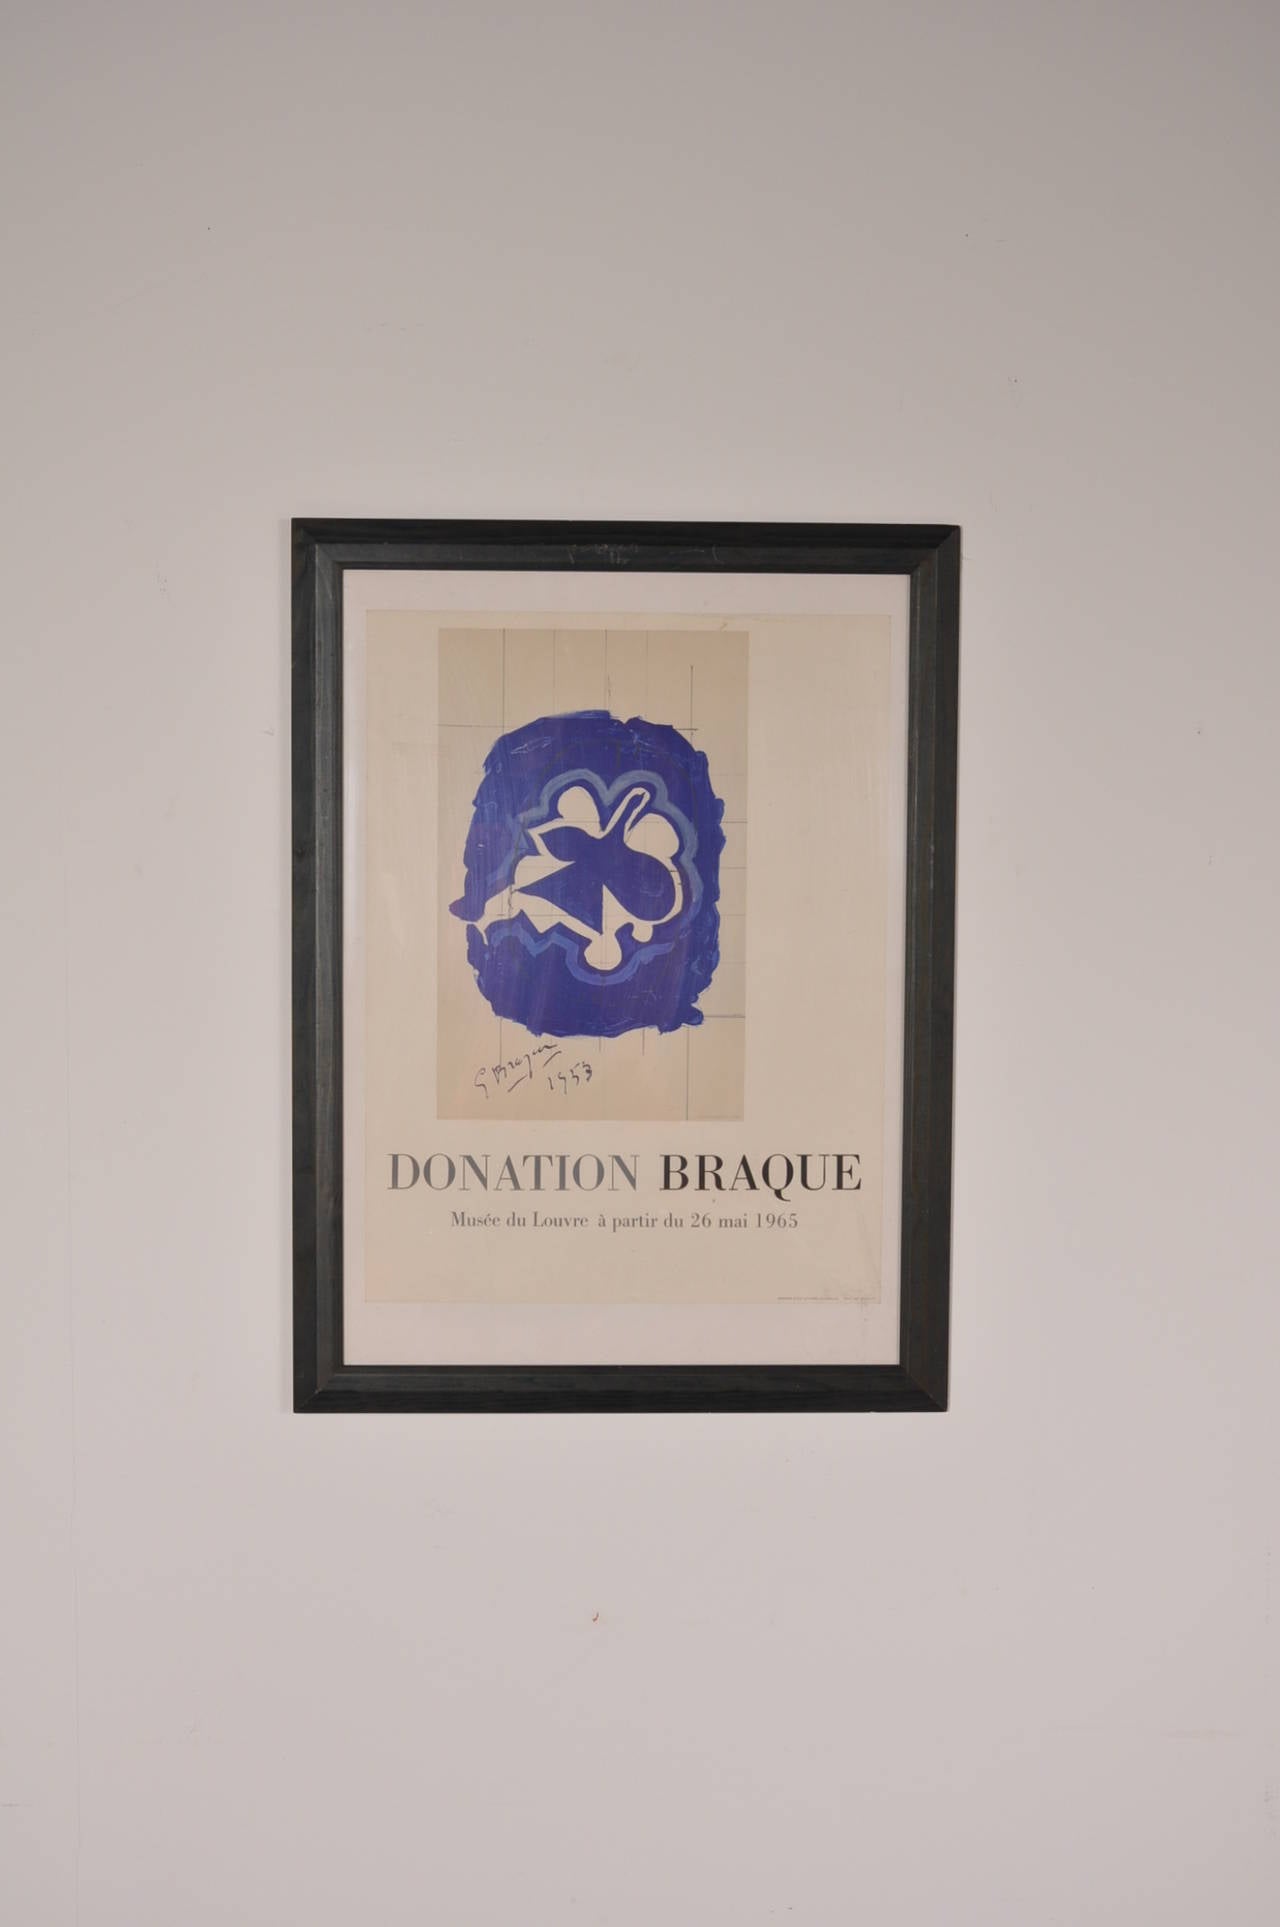 Unique donation lithography by George Braque, printed by Mourlot France in 1965.

This rare lithographic poster was created for an exhibition of works at the Louvre Museum in Paris.

In good original condition with minor wear consistent with age